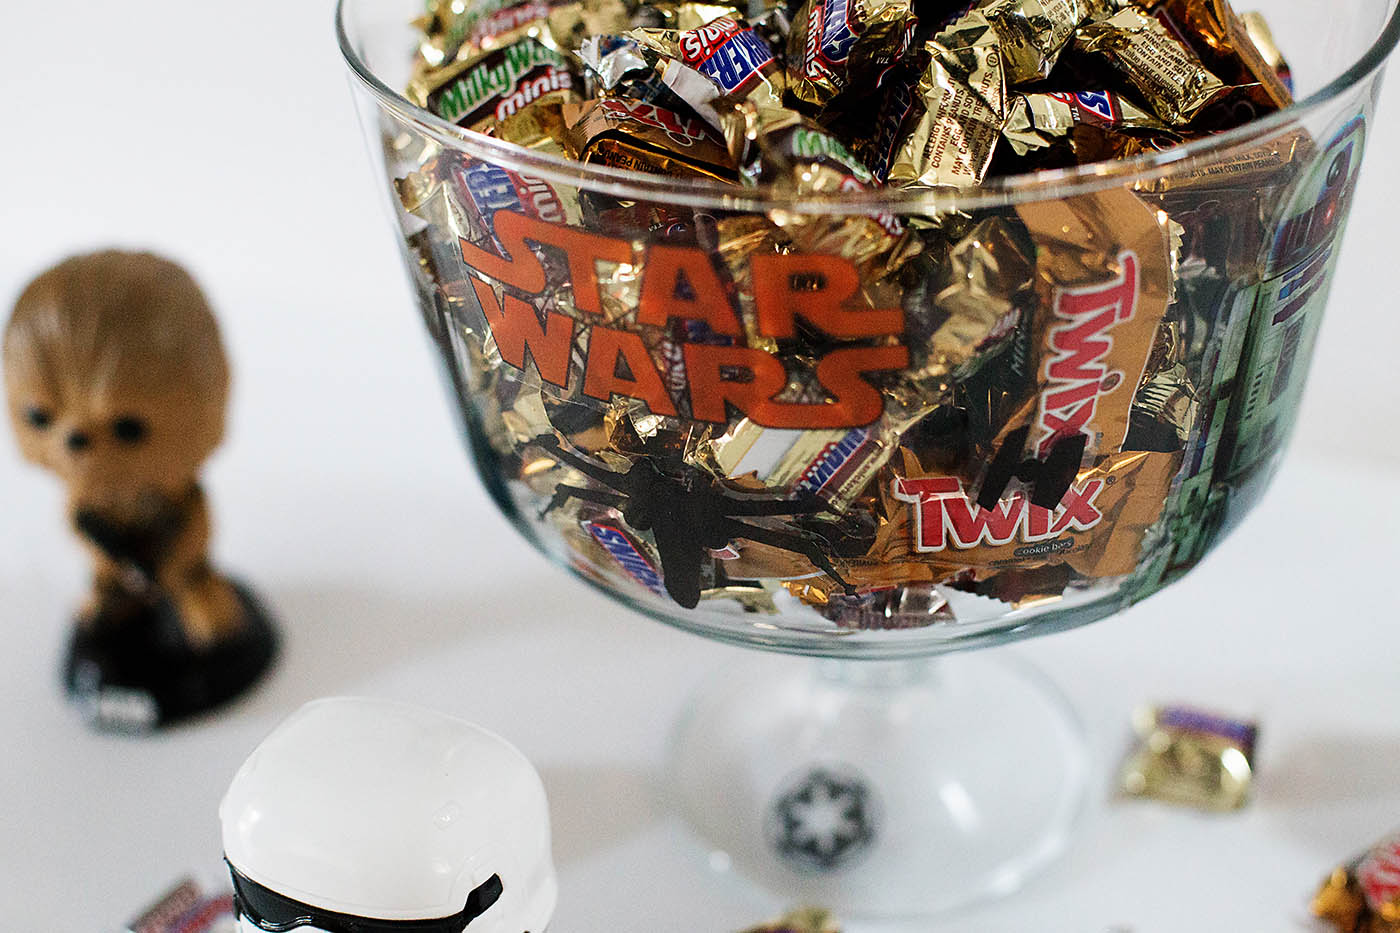 Easy Star Wars Candy Bowl - perfect for Halloween or parties.